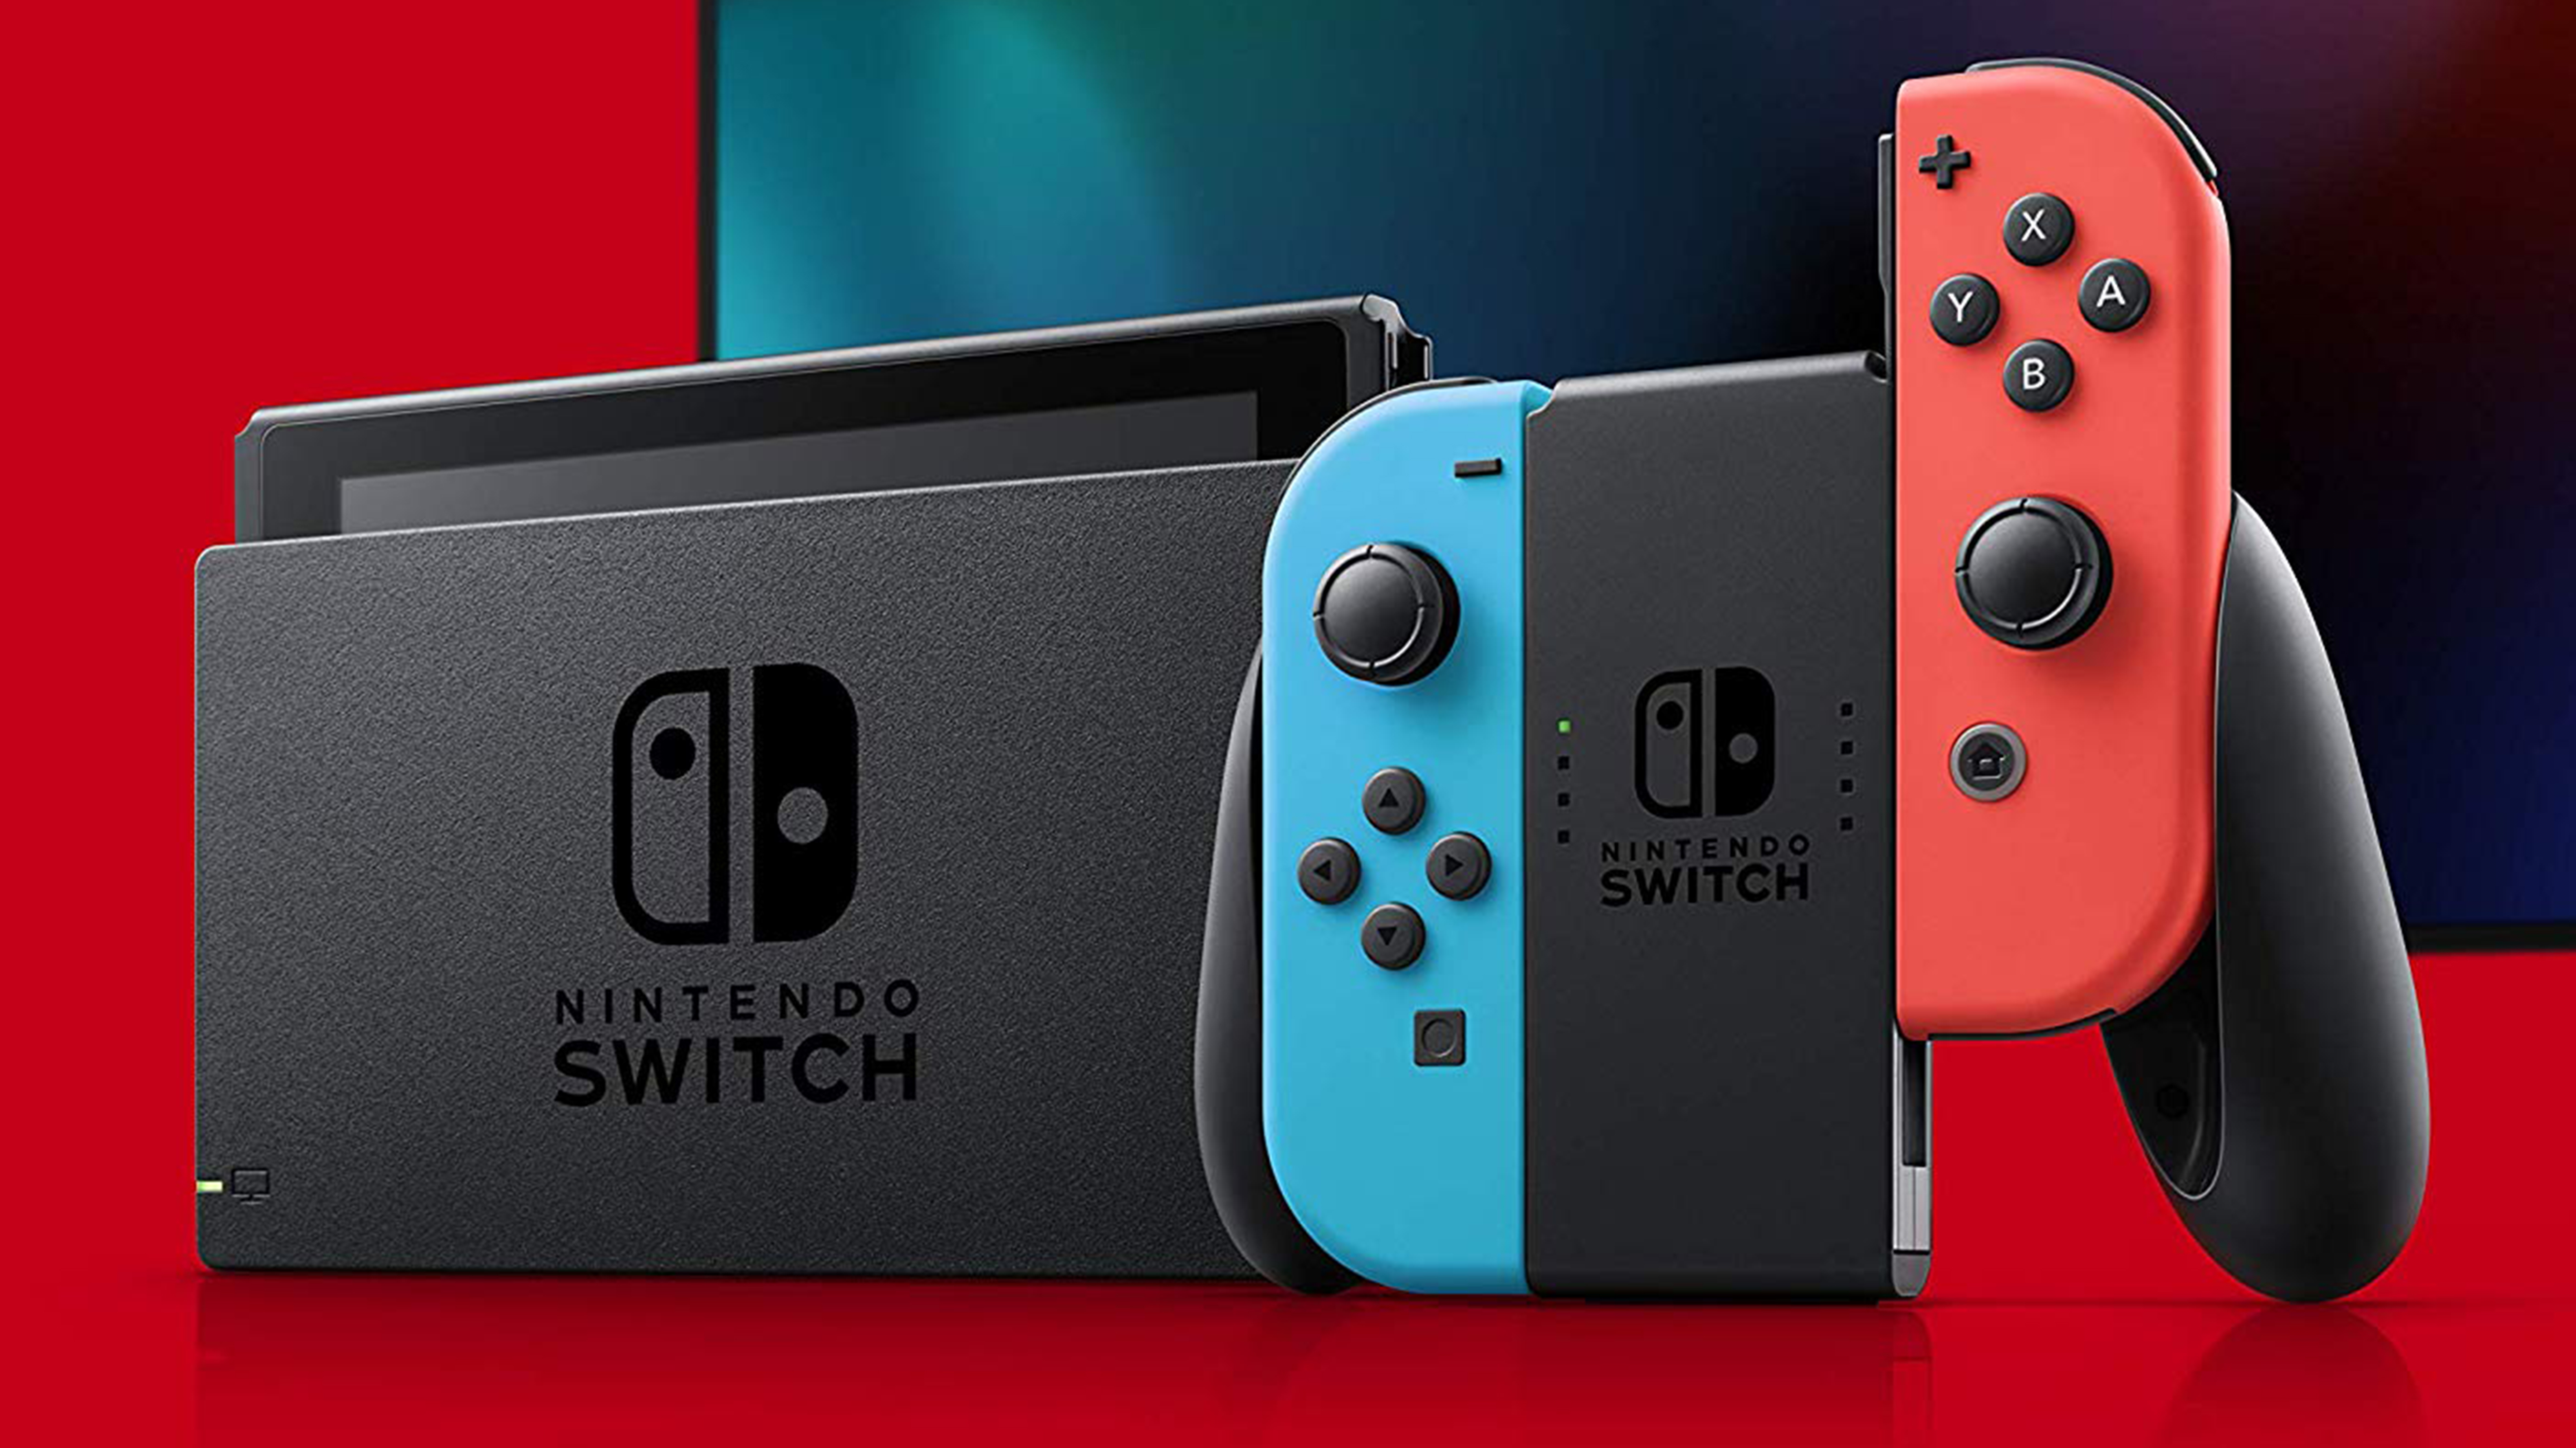 switch 25 gift card